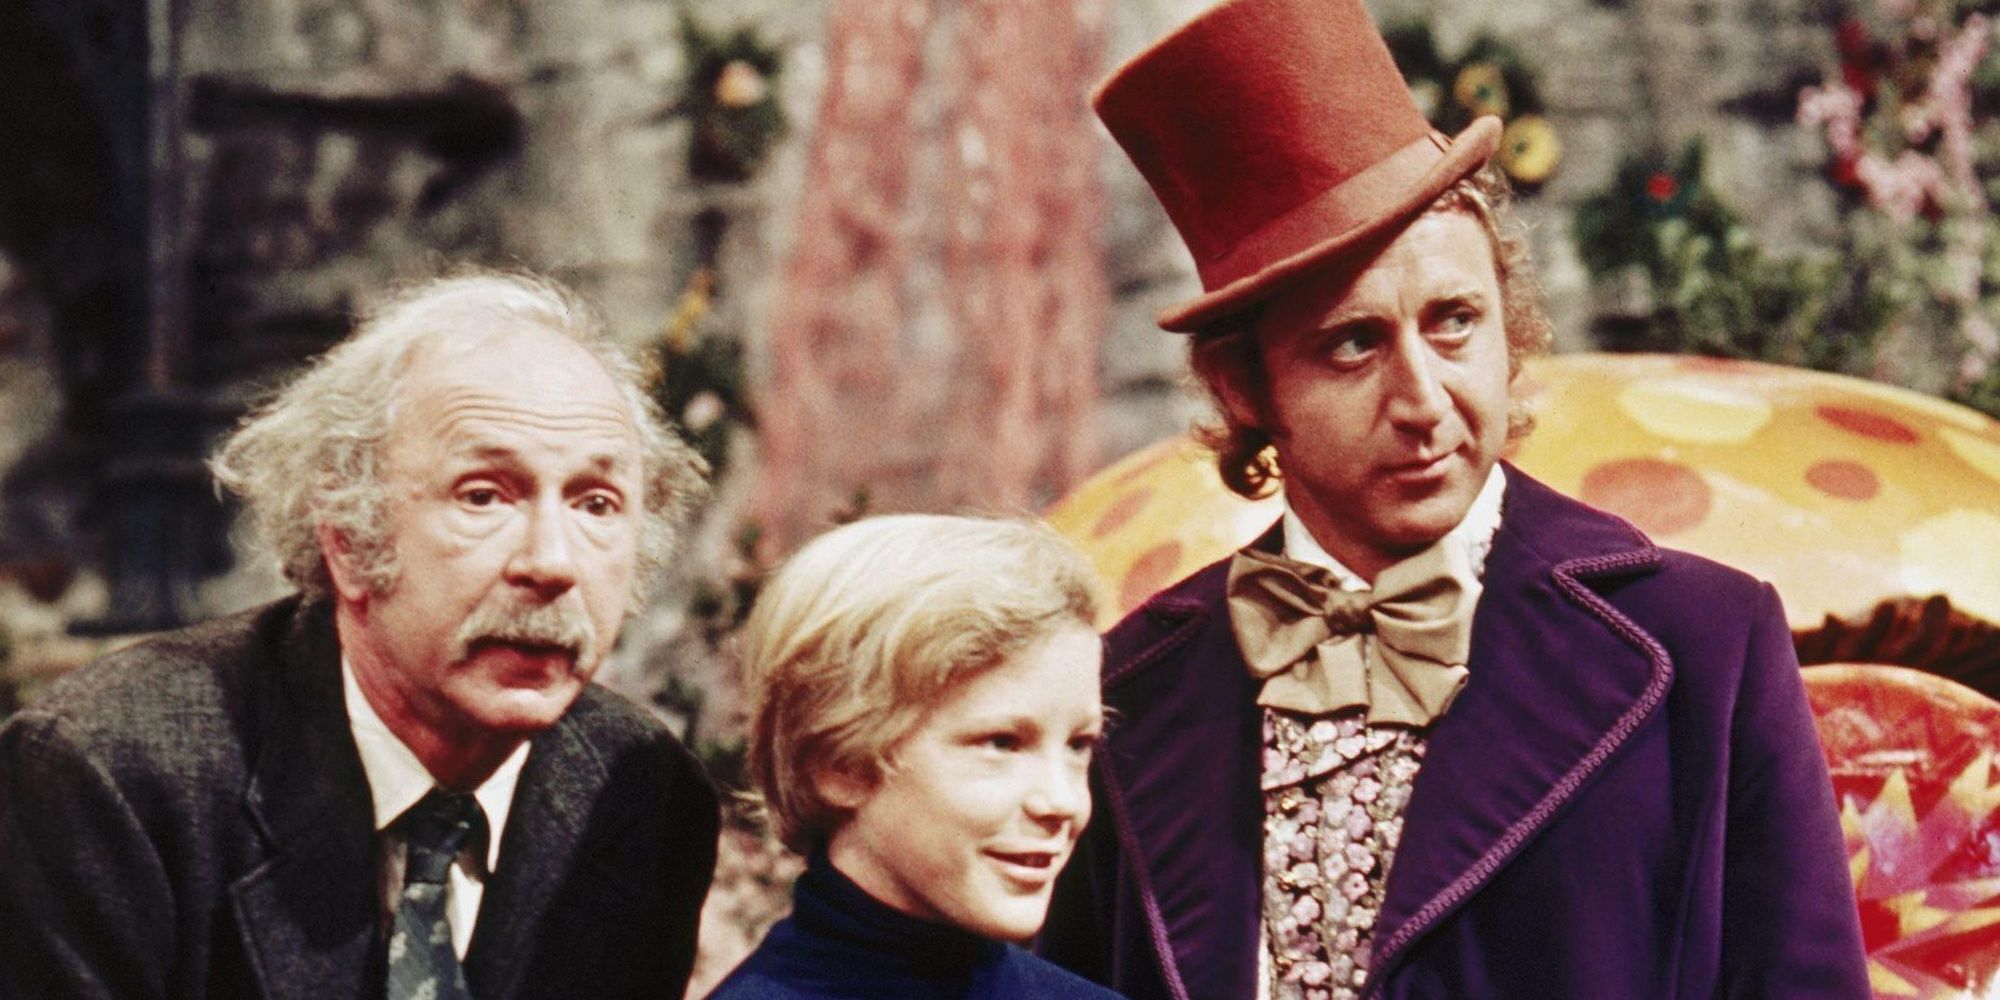 Grandpa Joe, Charlie and Willy Wonka are all looking at something